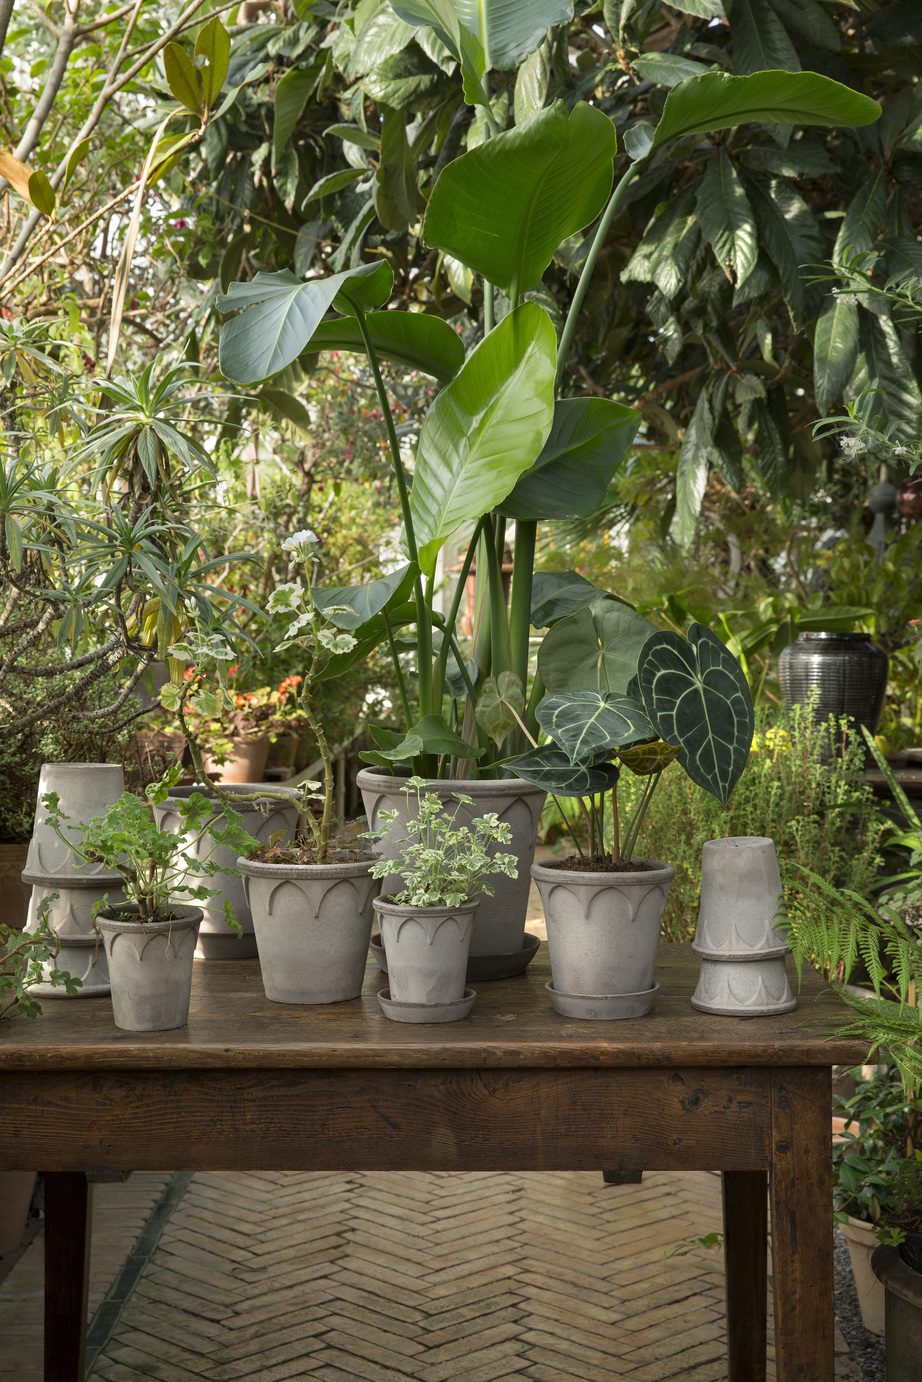 A collection of grey pots is arranged on a table surrounded by plants.